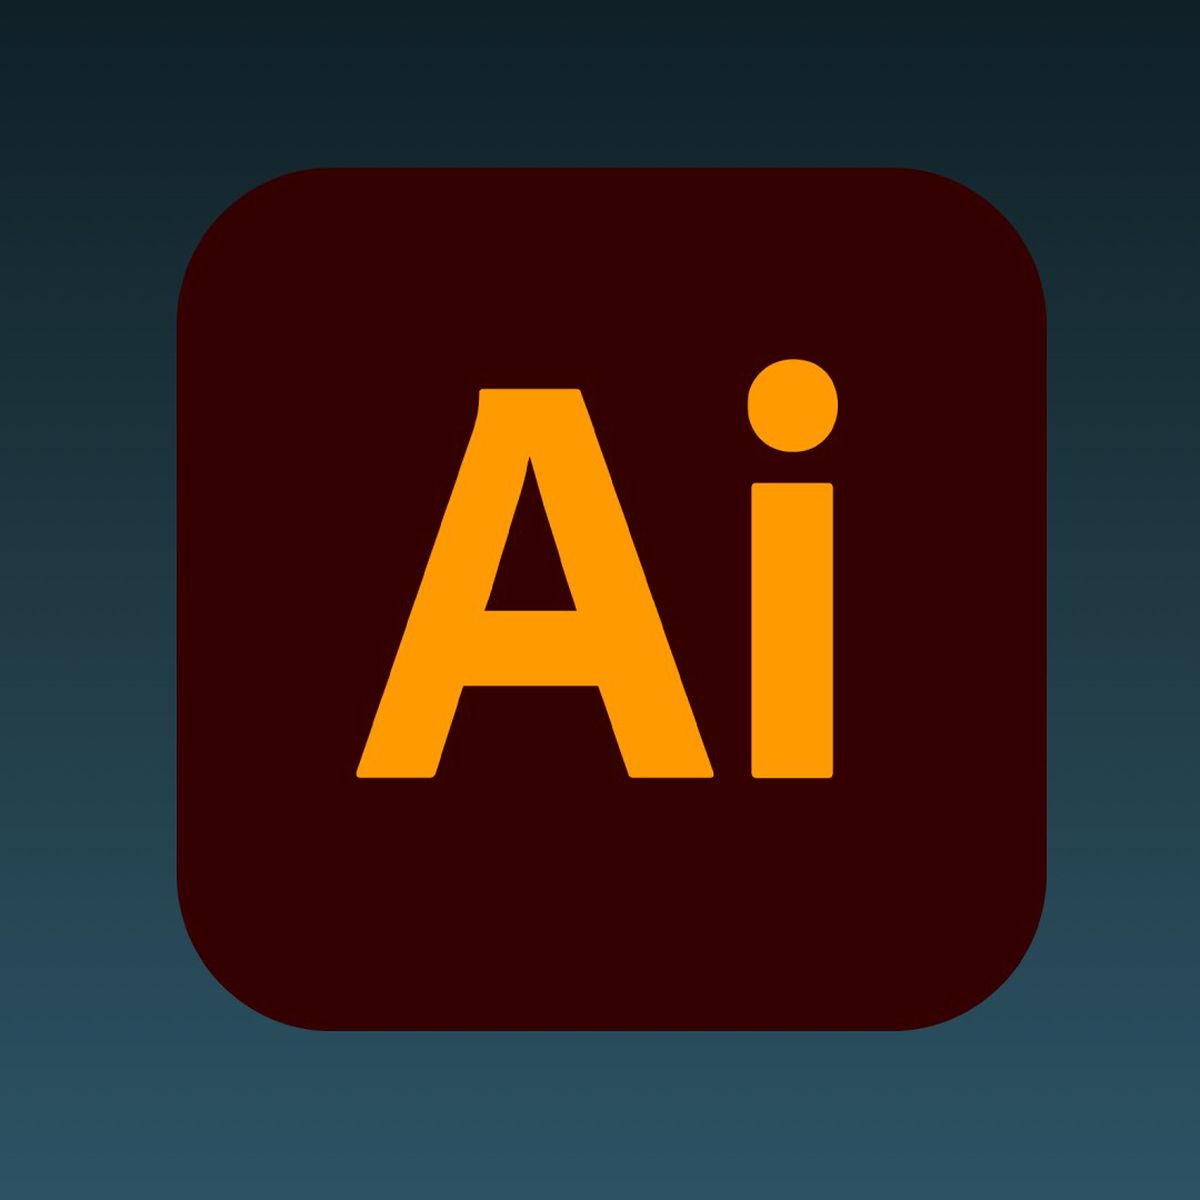 can you use adobe illustrator with intel core i 3